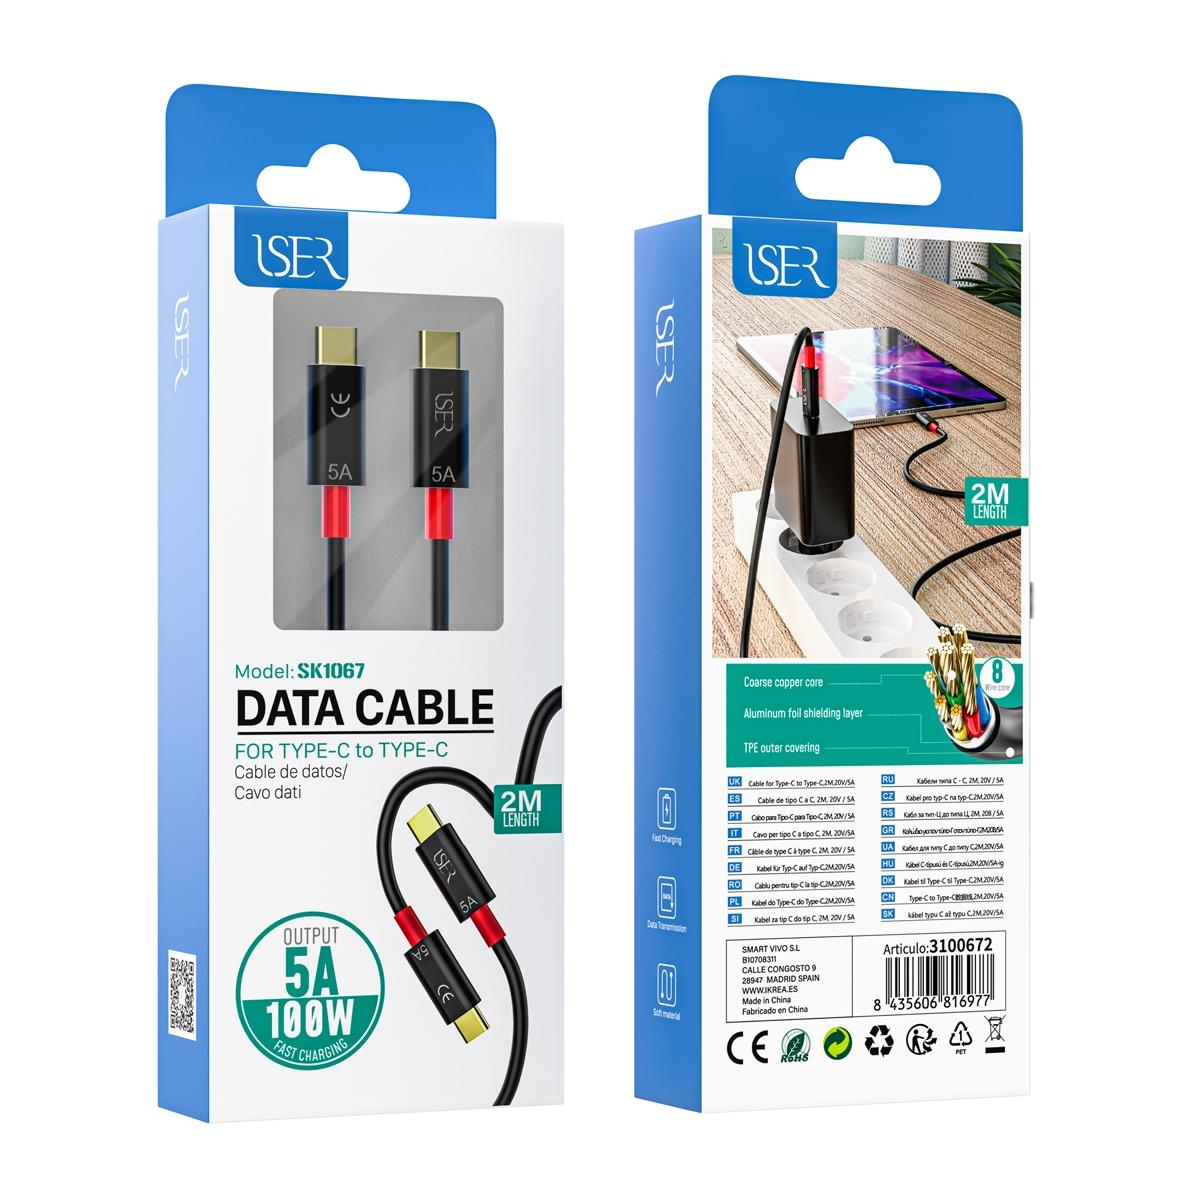 DATA CABLE TYPE-C TO TYPE-C 5A 100W 2M SK1067 ISER